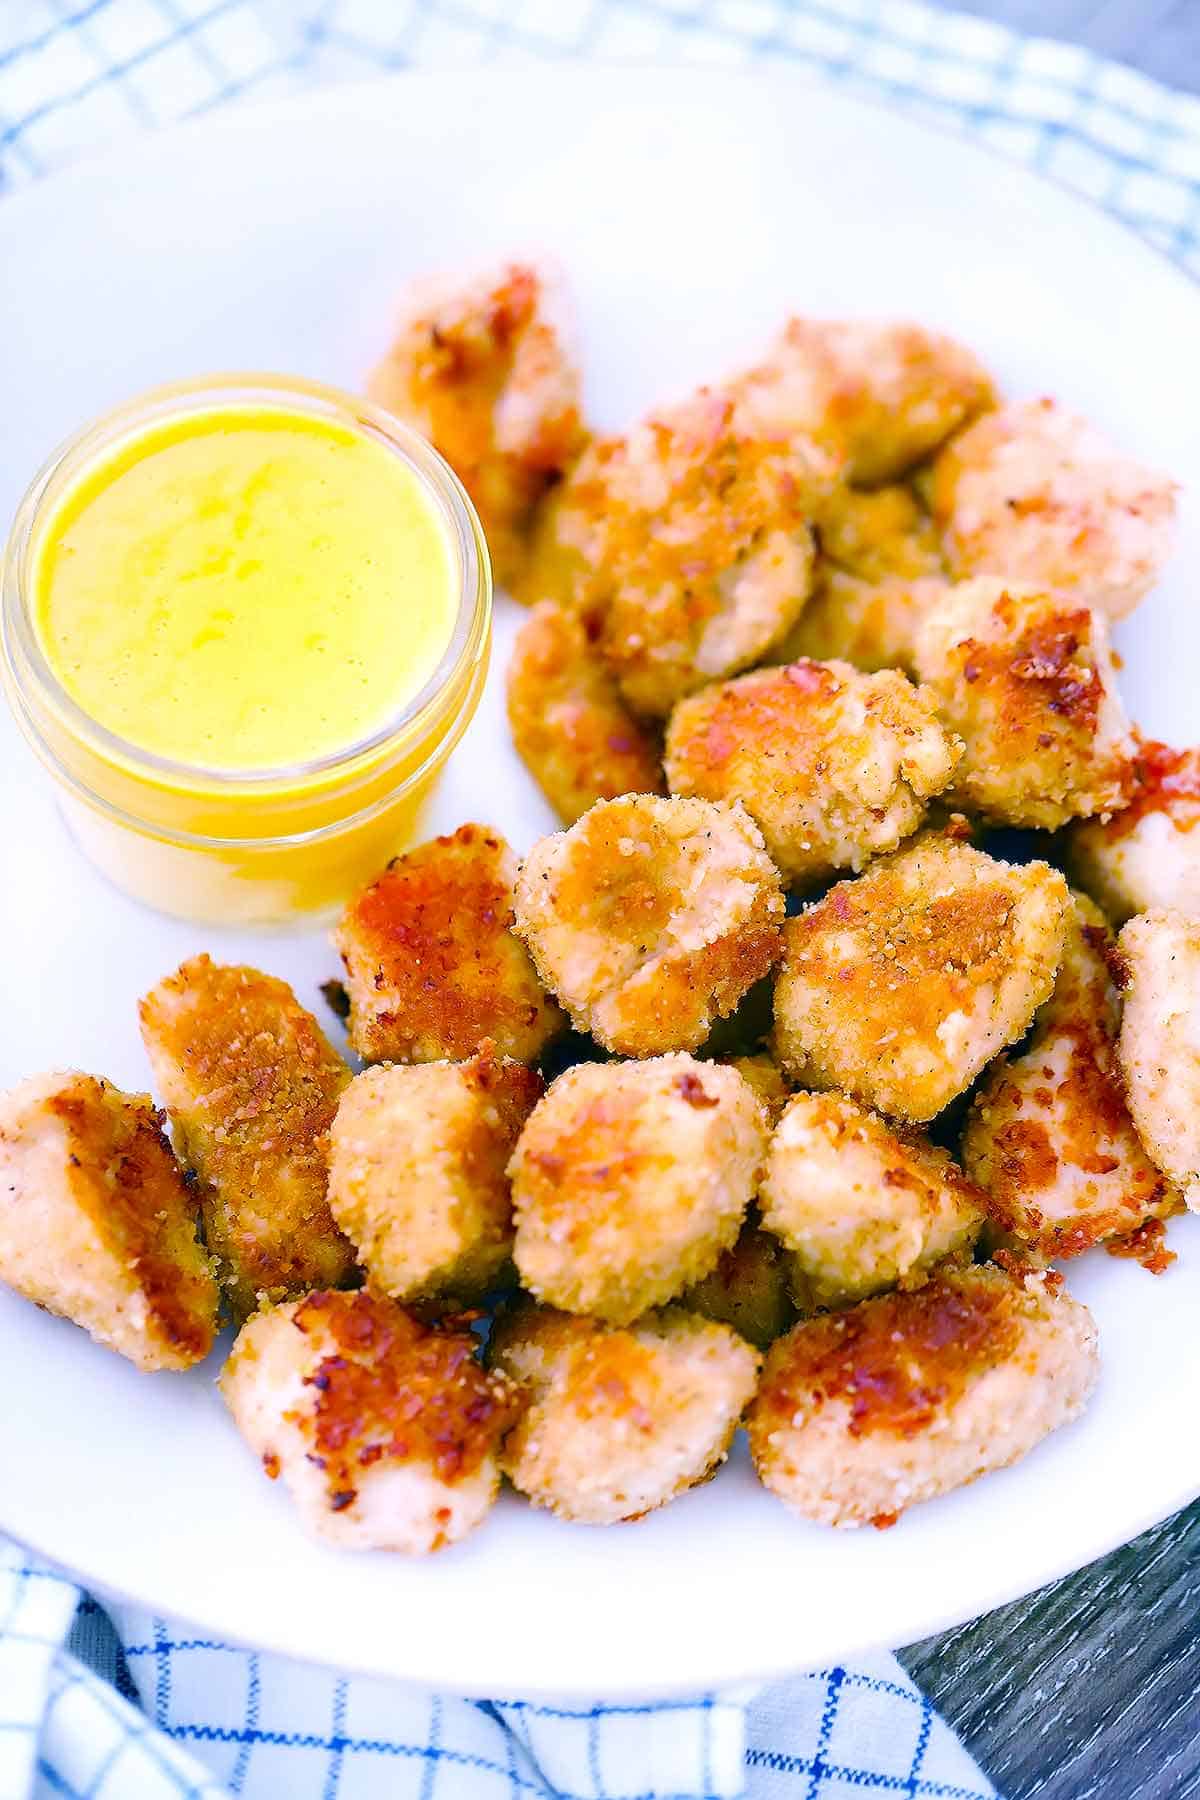 A plate of homemade chicken nuggets and honey mustard sauce.